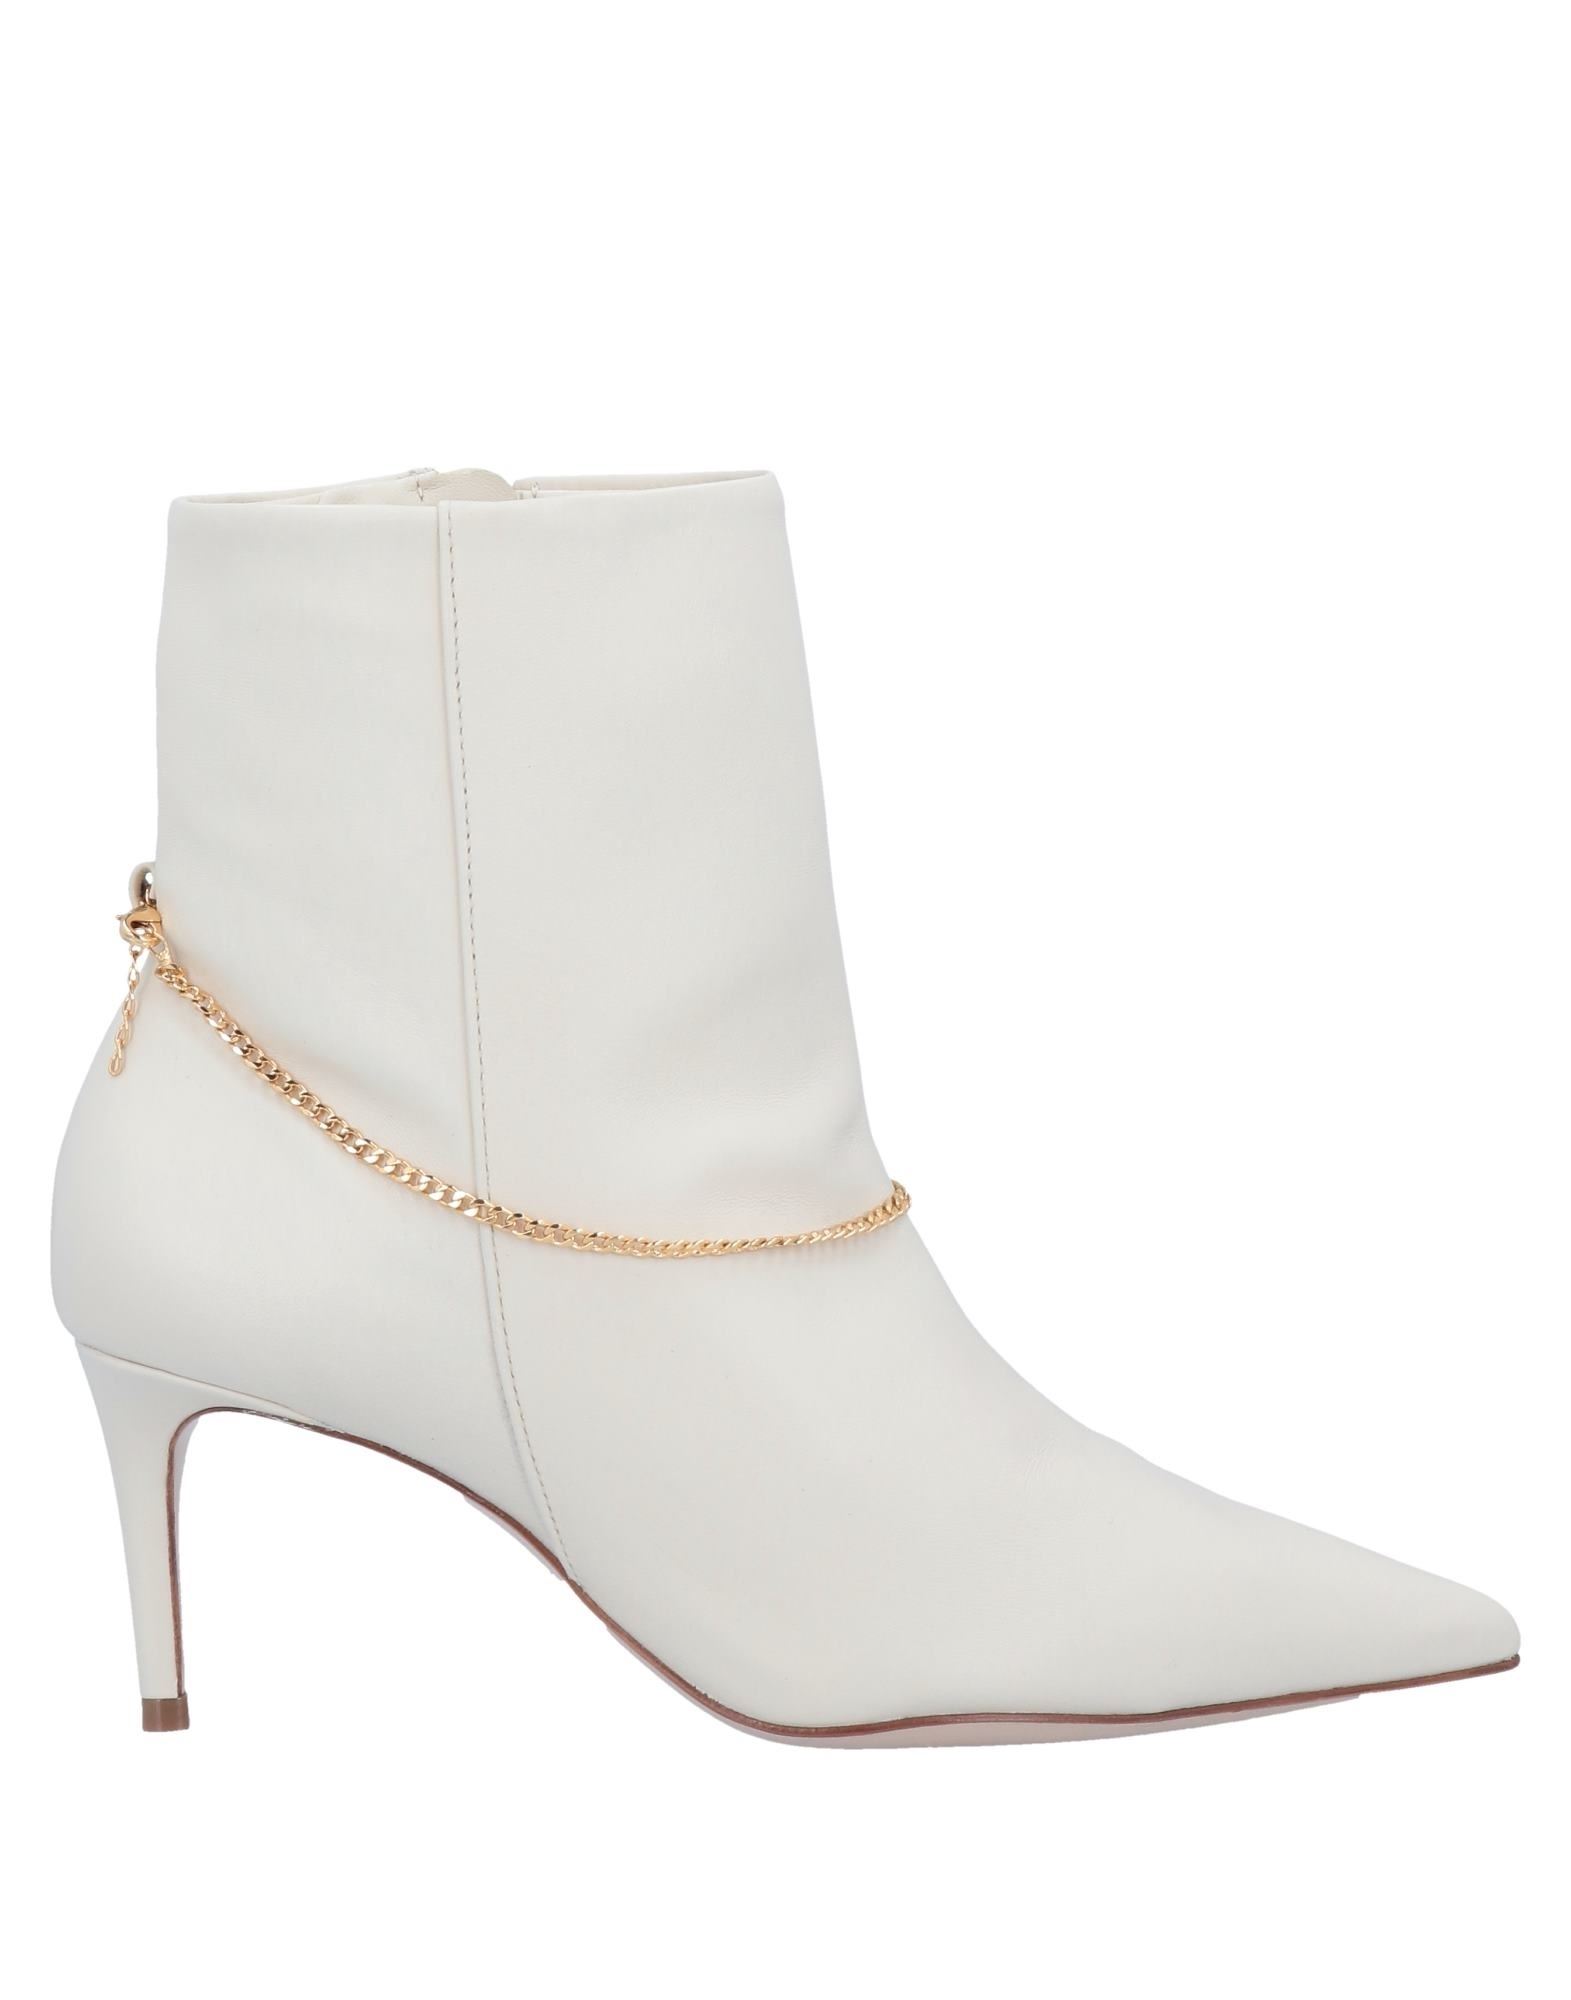 Schutz Ankle Boots In Ivory